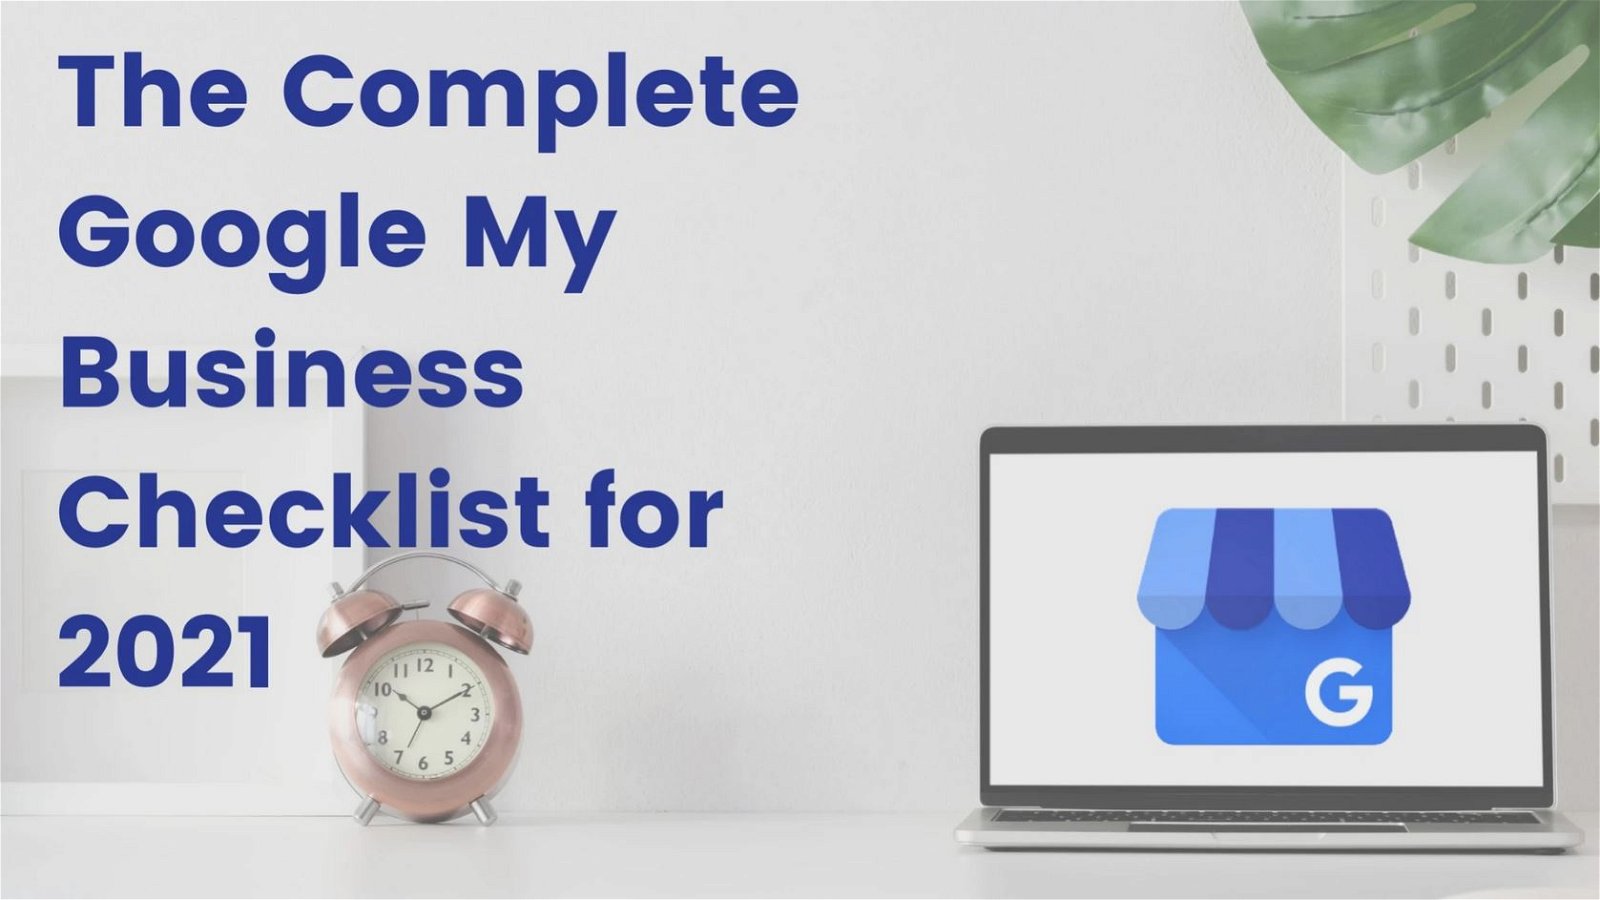 The Complete Google My Business Checklist 2021